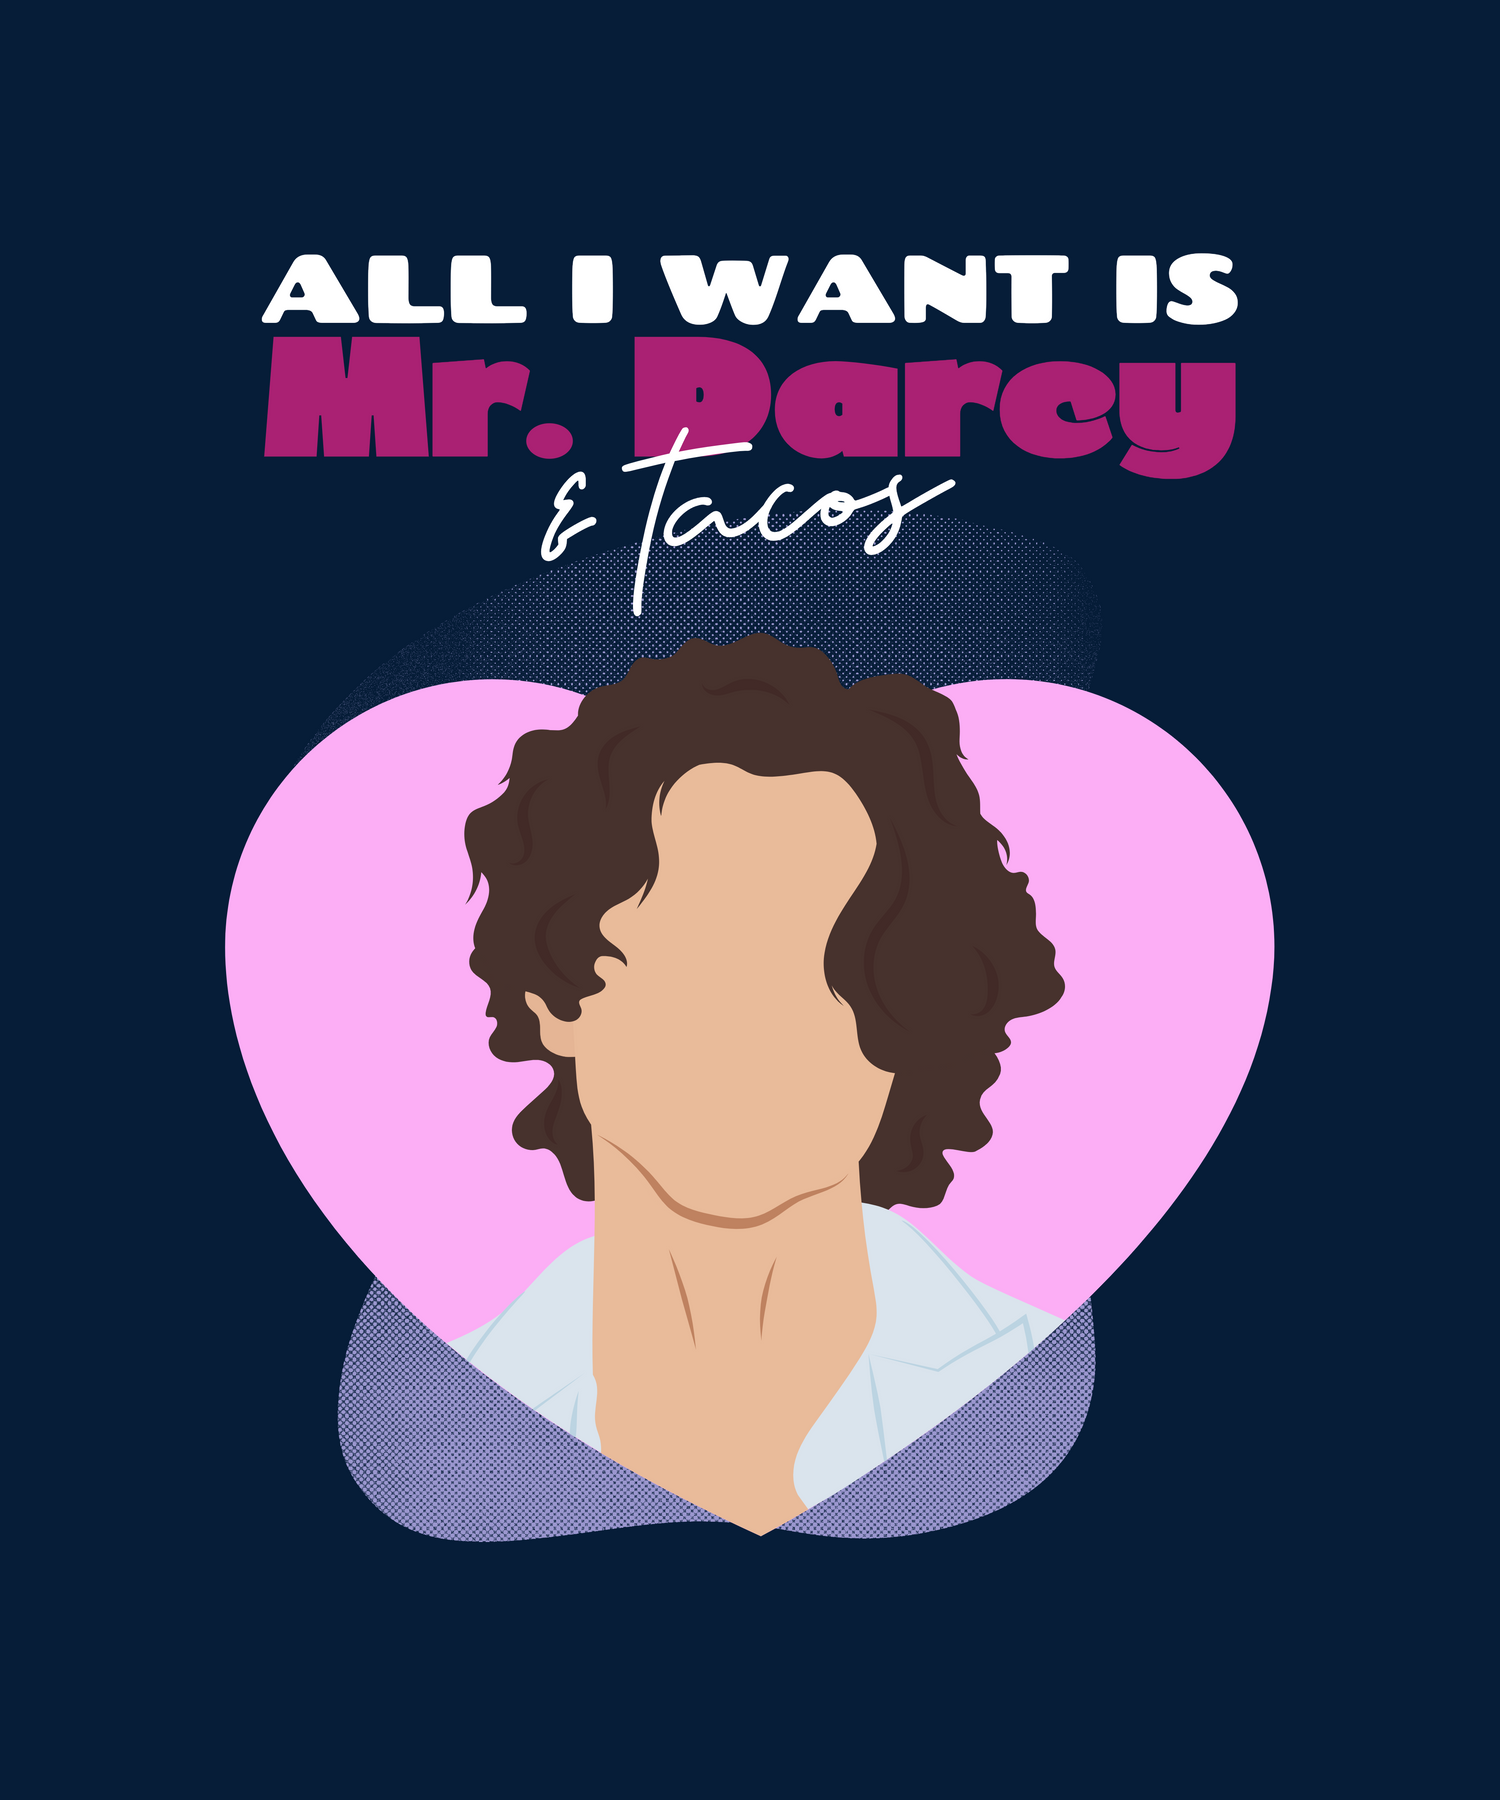 All I want is Mr. Darcy